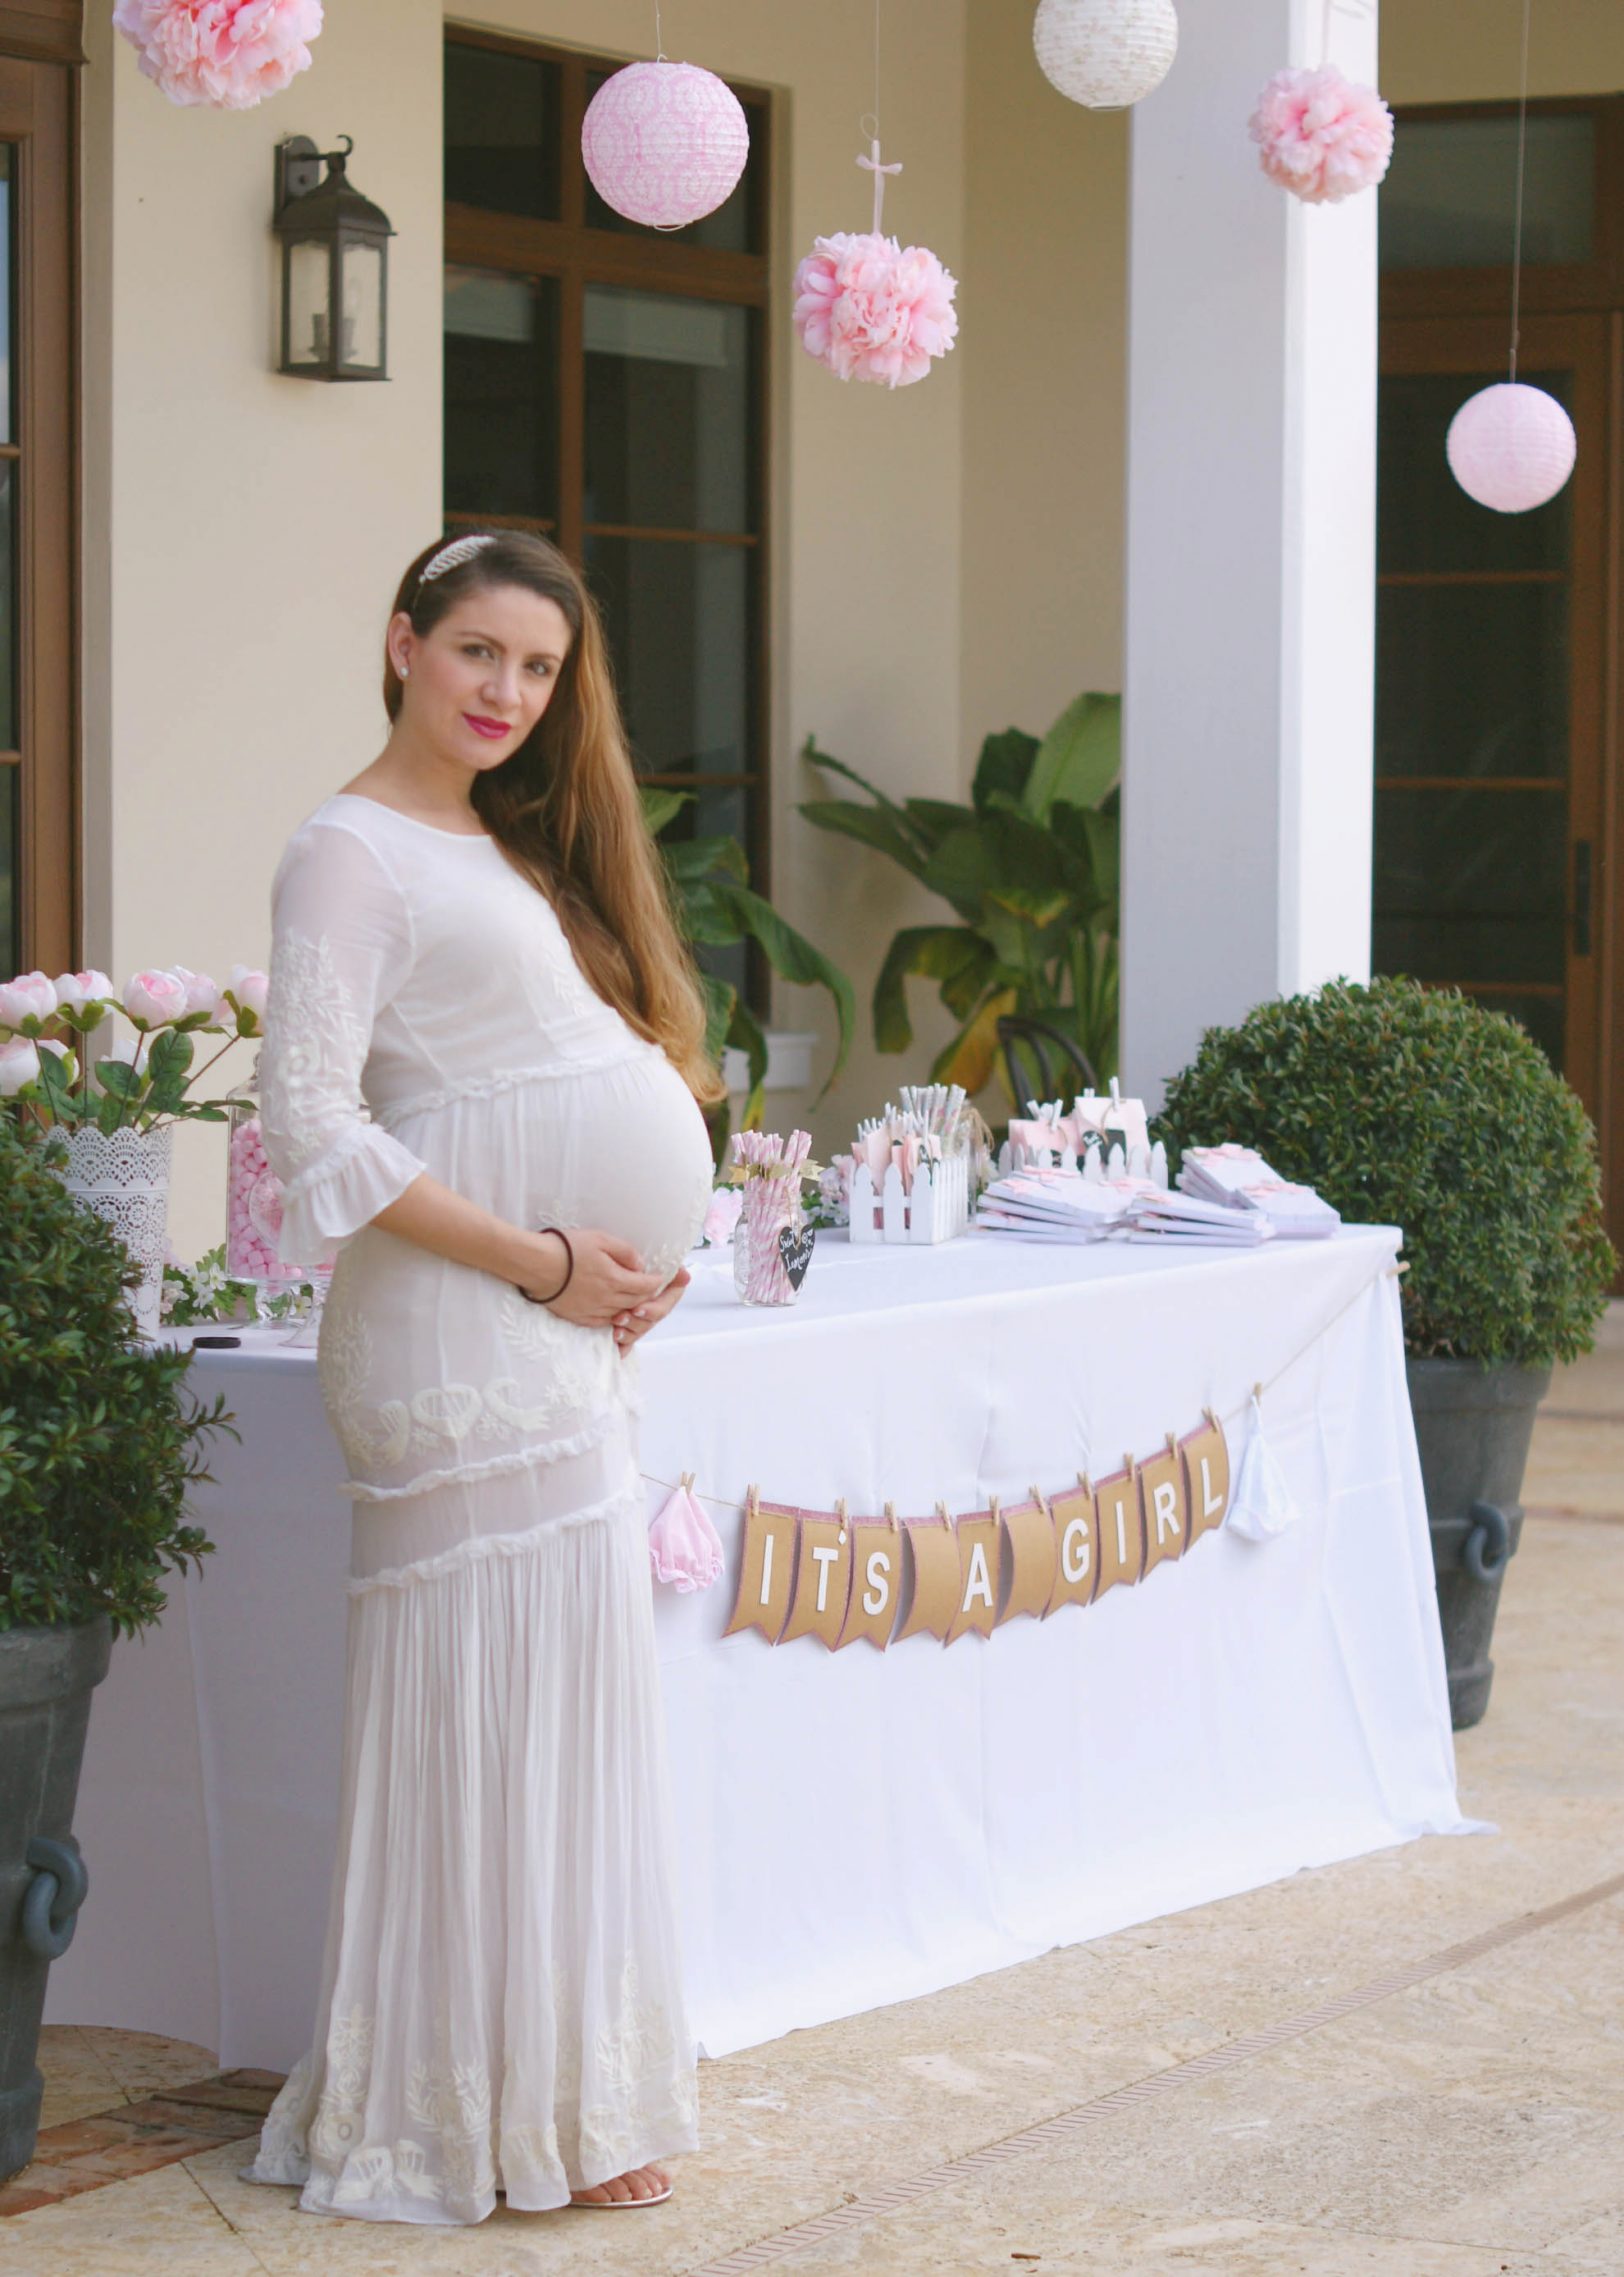 Full Size of Baby Shower:maternity Clothes H&m Showing Lsi Keywords For Baby Shower Dresses Maternity Evening Gowns Non Maternity Dresses For Baby Shower Maternity Blouses For Baby Shower Plus Size Maternity Dresses For Baby Shower What Should I Wear To My Baby Shower Plus Size Maternity Clothes